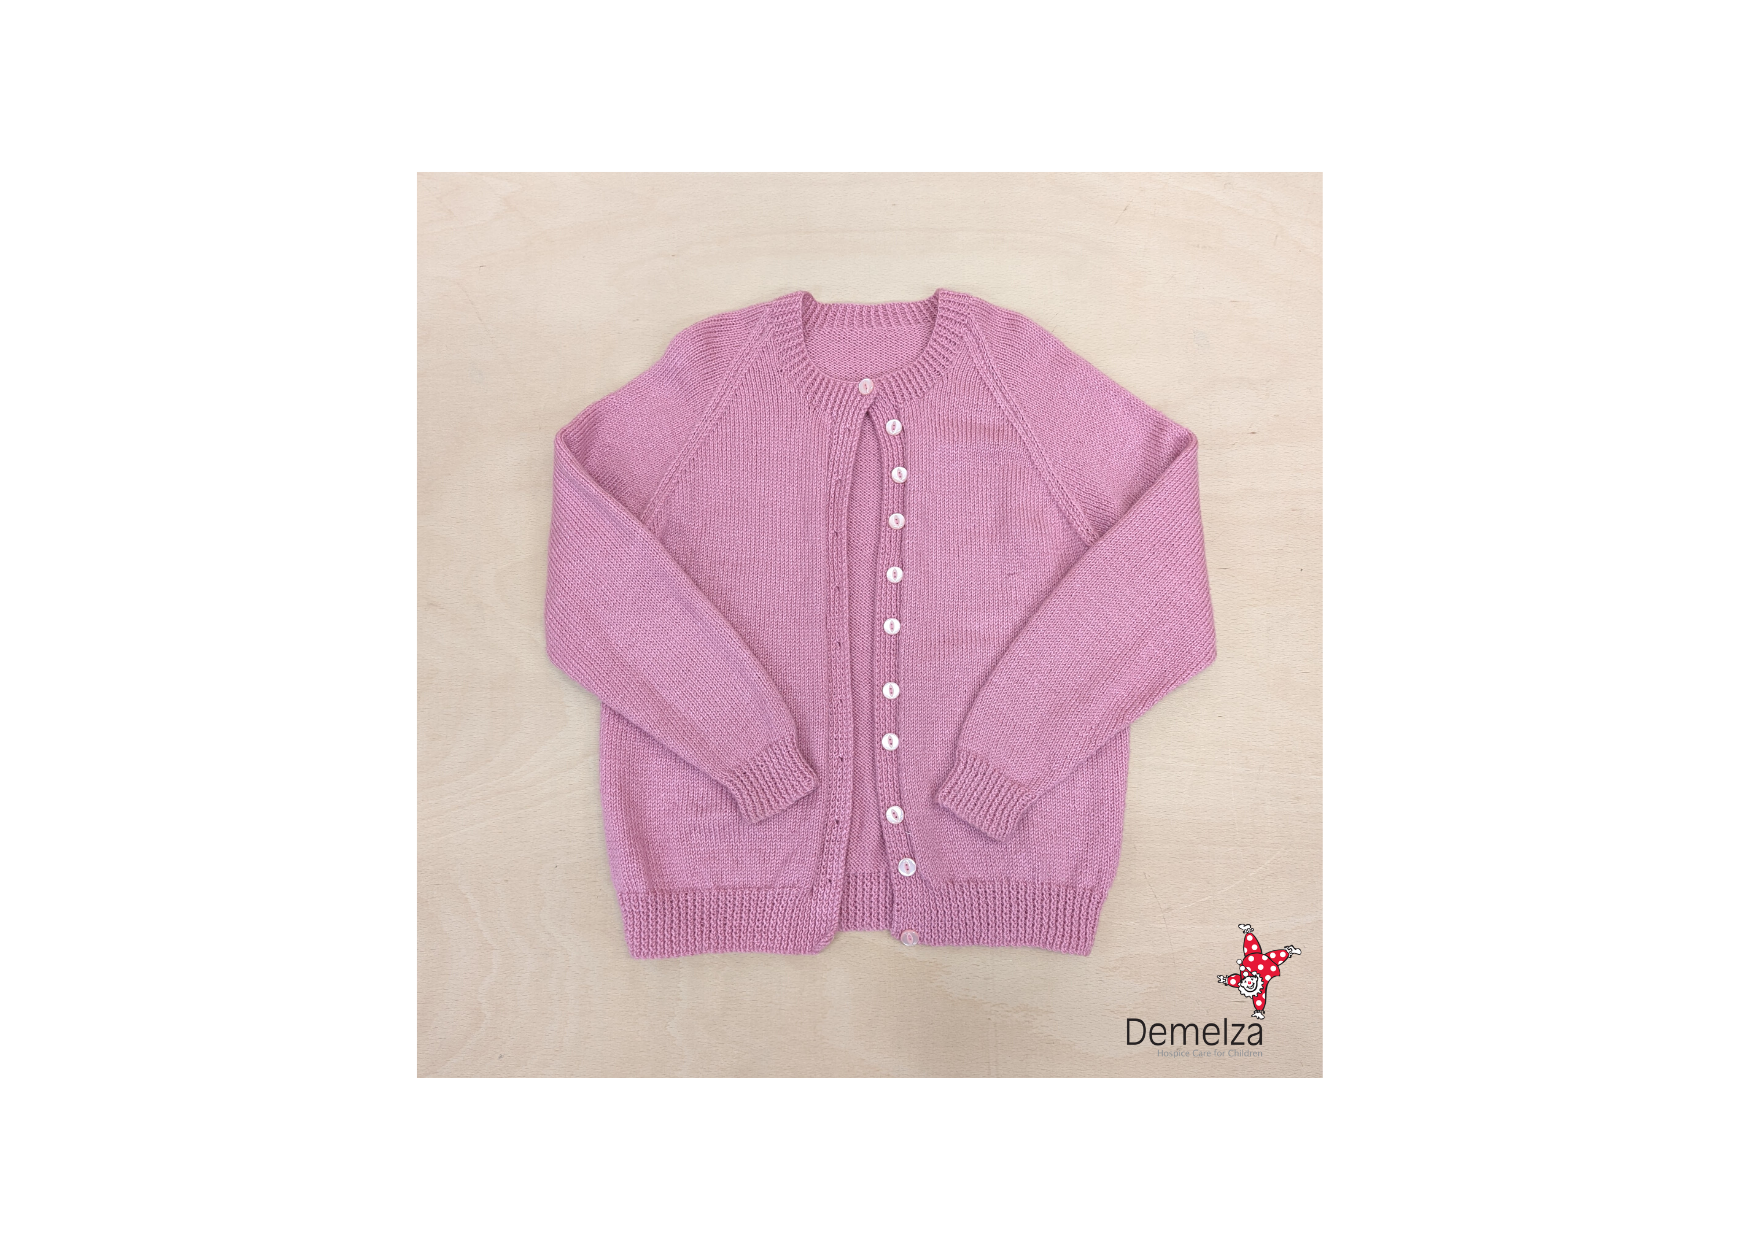 Hand knitted pink acrylic wool cardigan